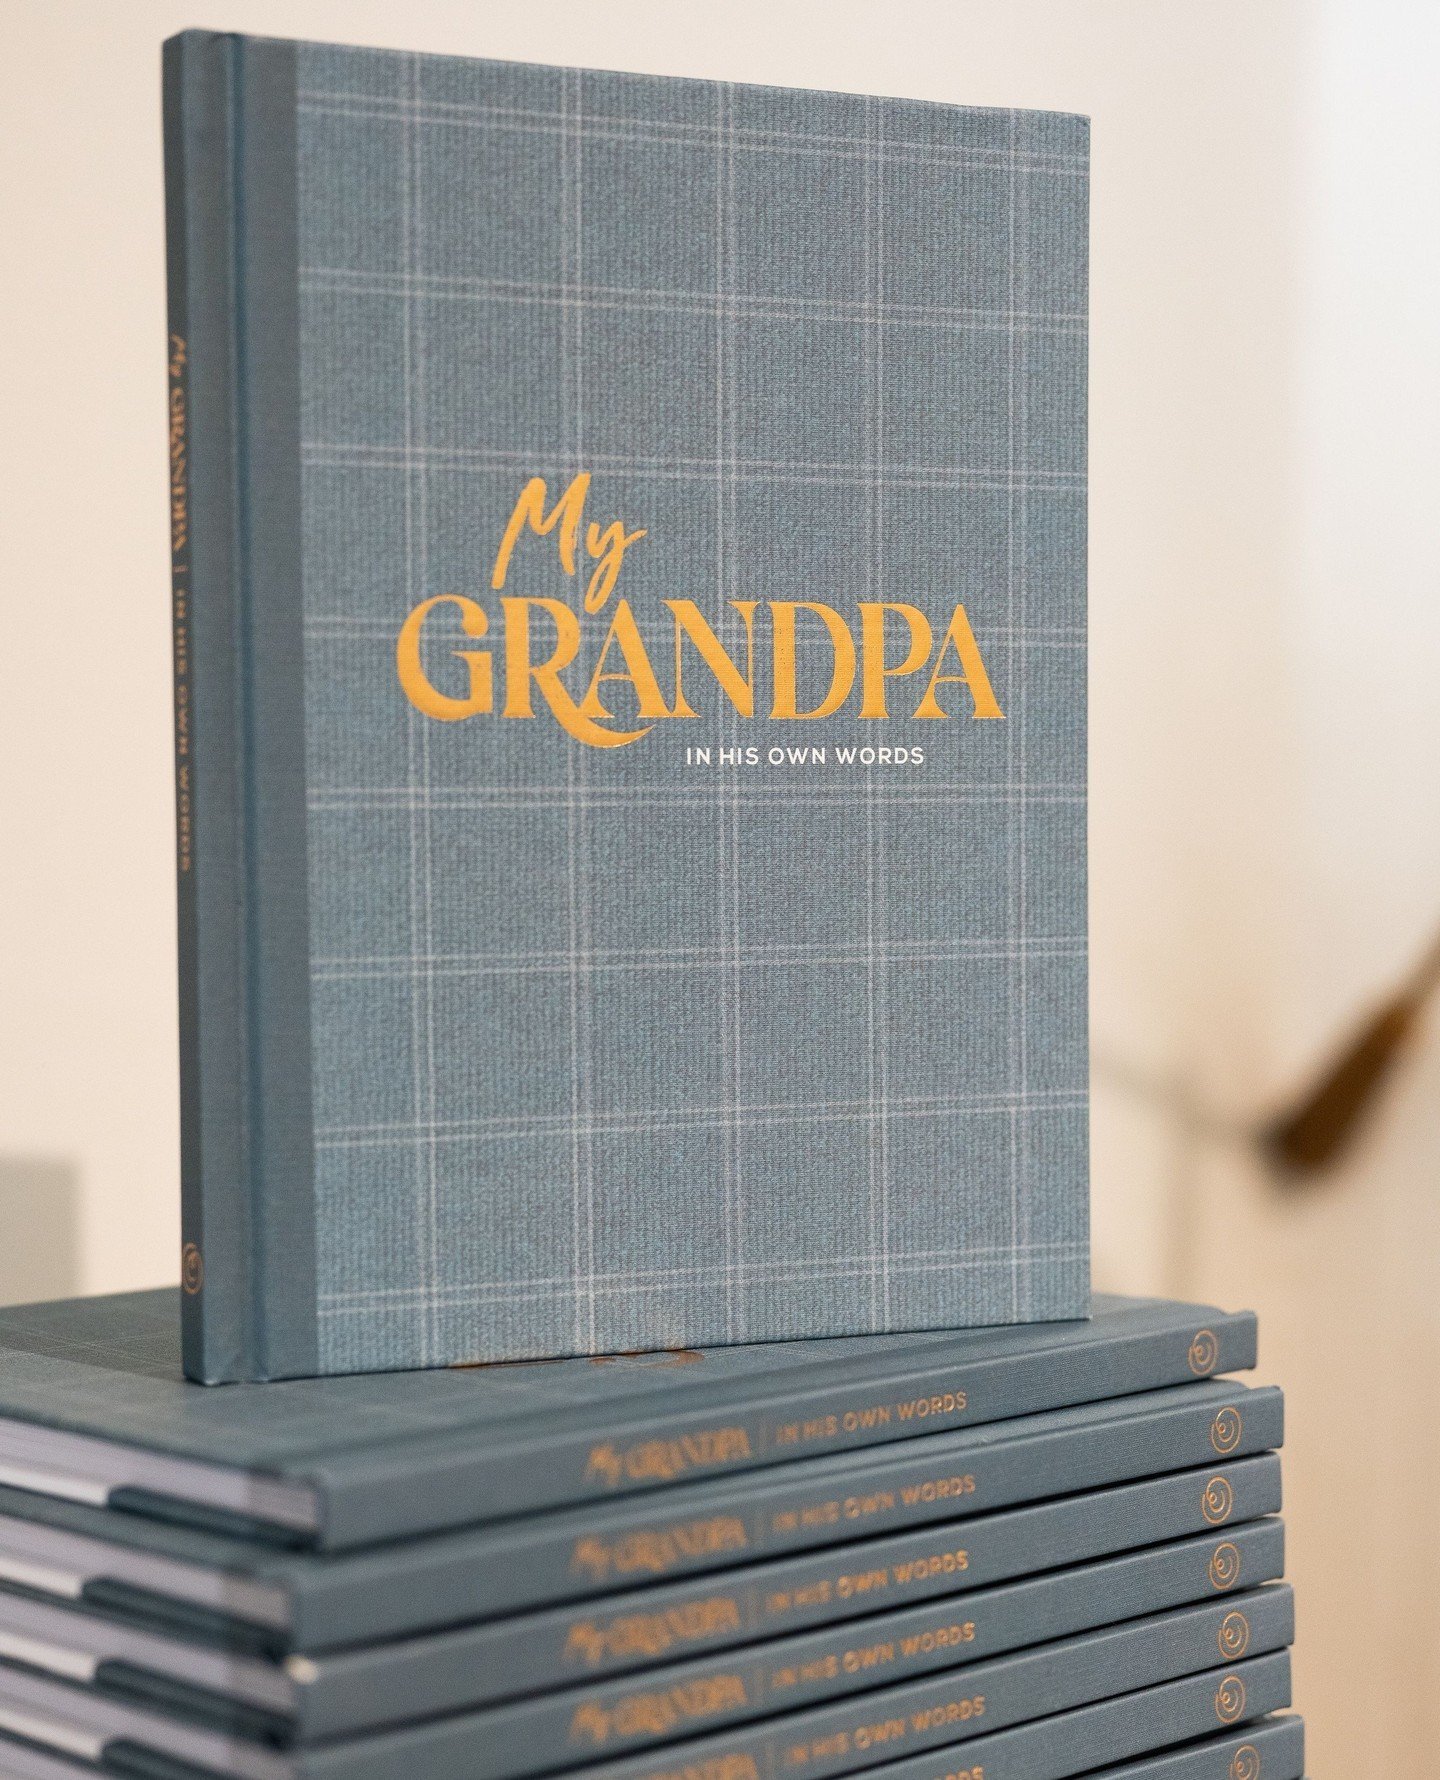 For the dad who's being promoted to grandpa this Father's Day!⁠
⁠
Celebrate his journey and create a keepsake that the whole family will treasure. Laugh together, listen to his tales, and honor his life with this special keepsake book. Once completed